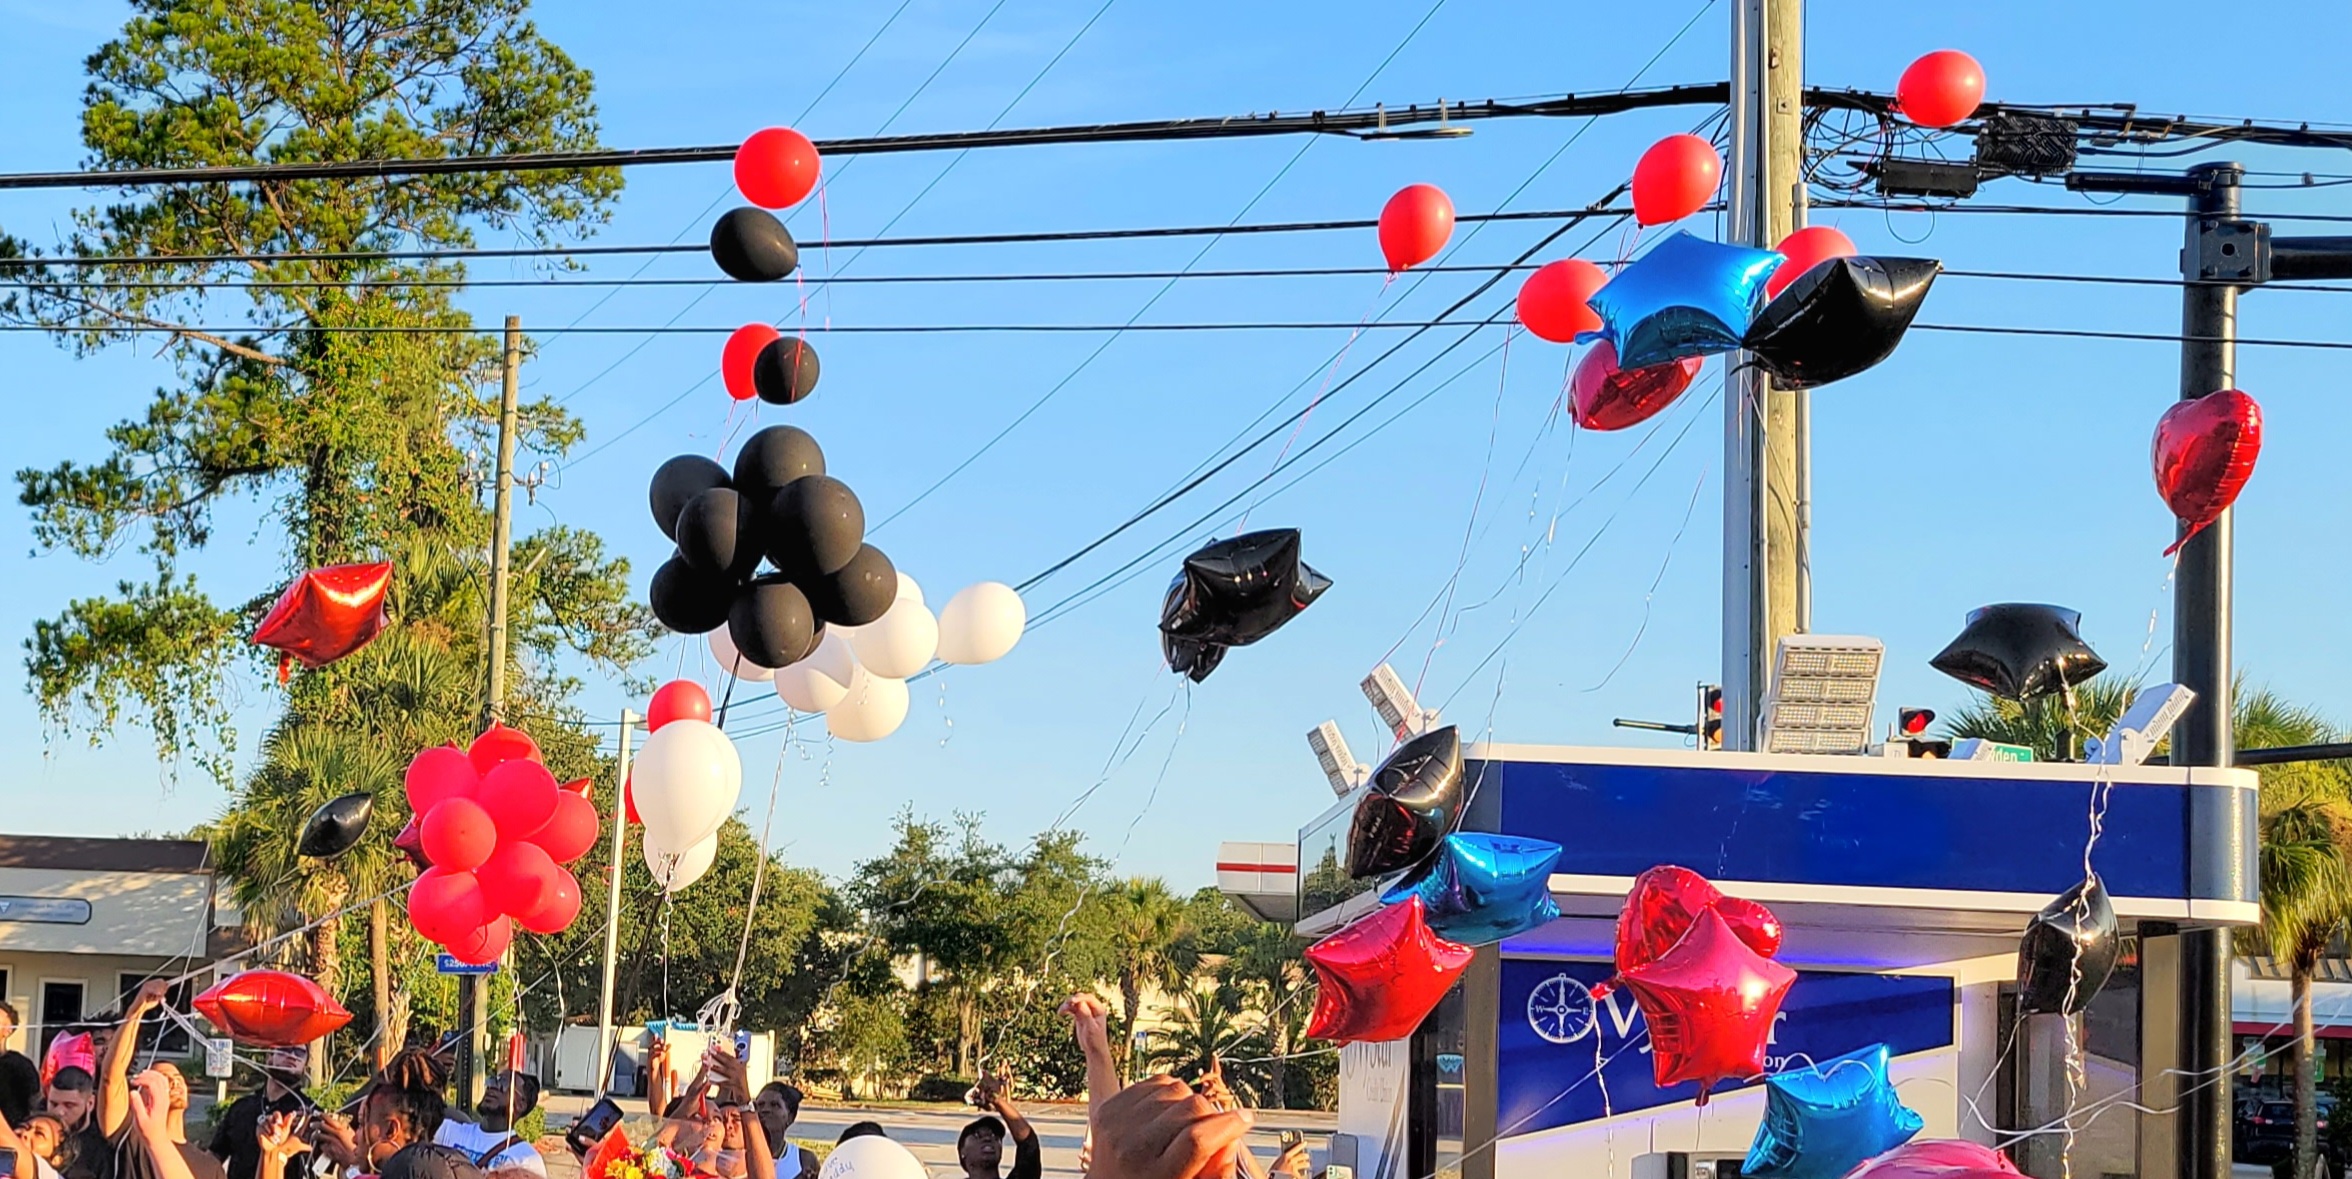 Featured image for “Jacksonville may ban balloon releases”